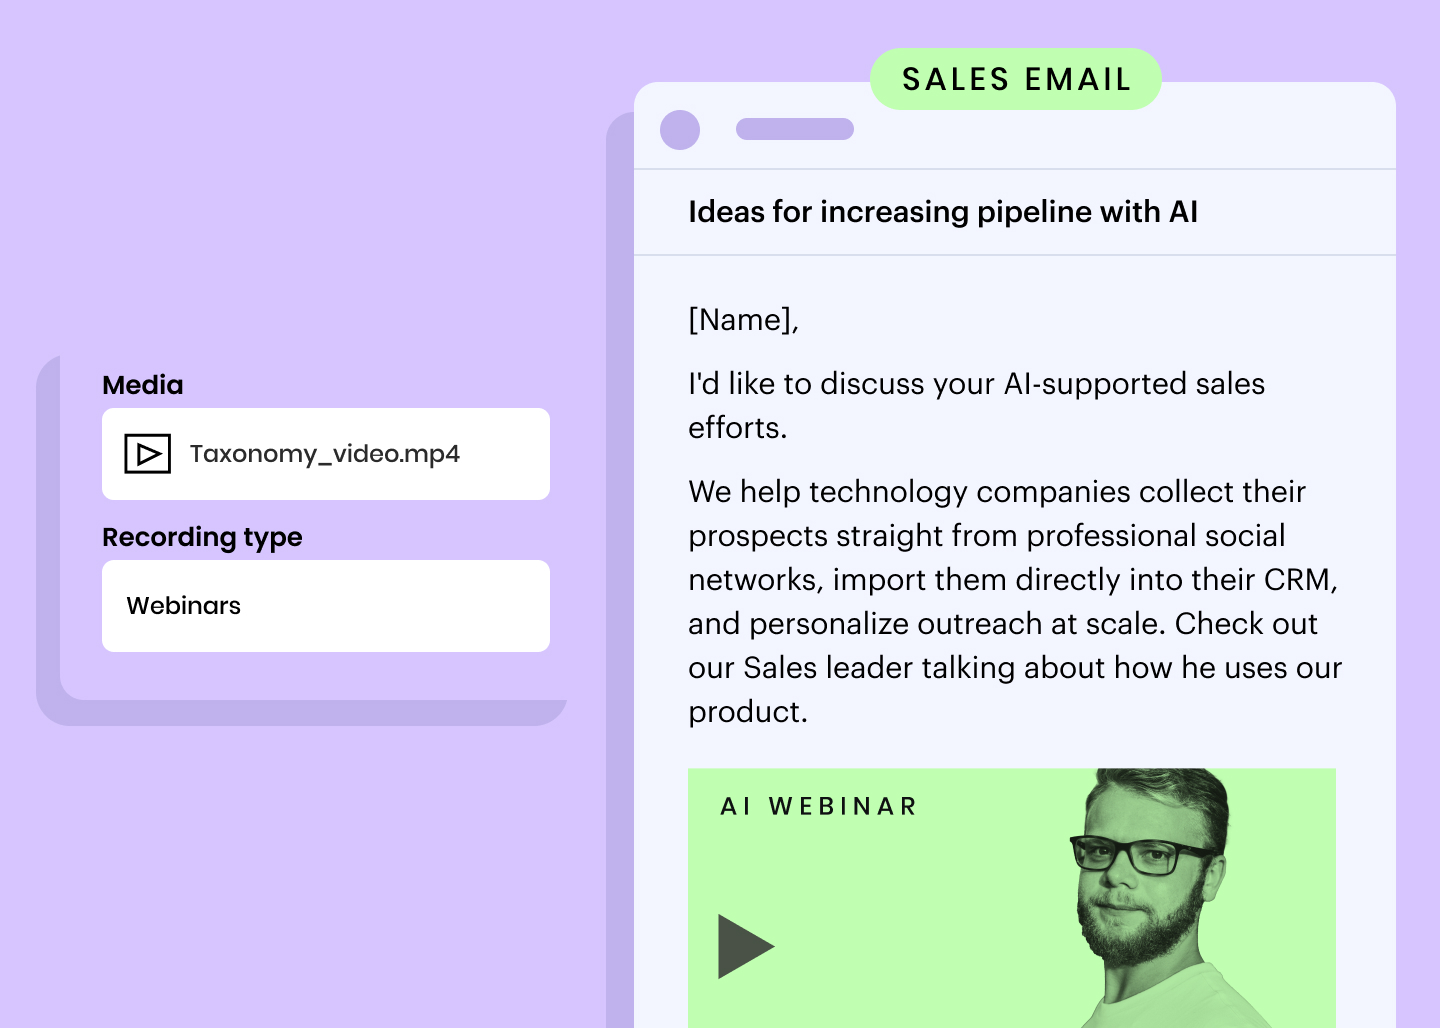 Sales email example: [Name], I'd like to discuss your AI-supported sales efforts. We help technology companies collect their prospects straight from professional social networks, import them directly into their CRM, and personalize outreach at scale. Check out our Sales leader talking about how he uses our product.